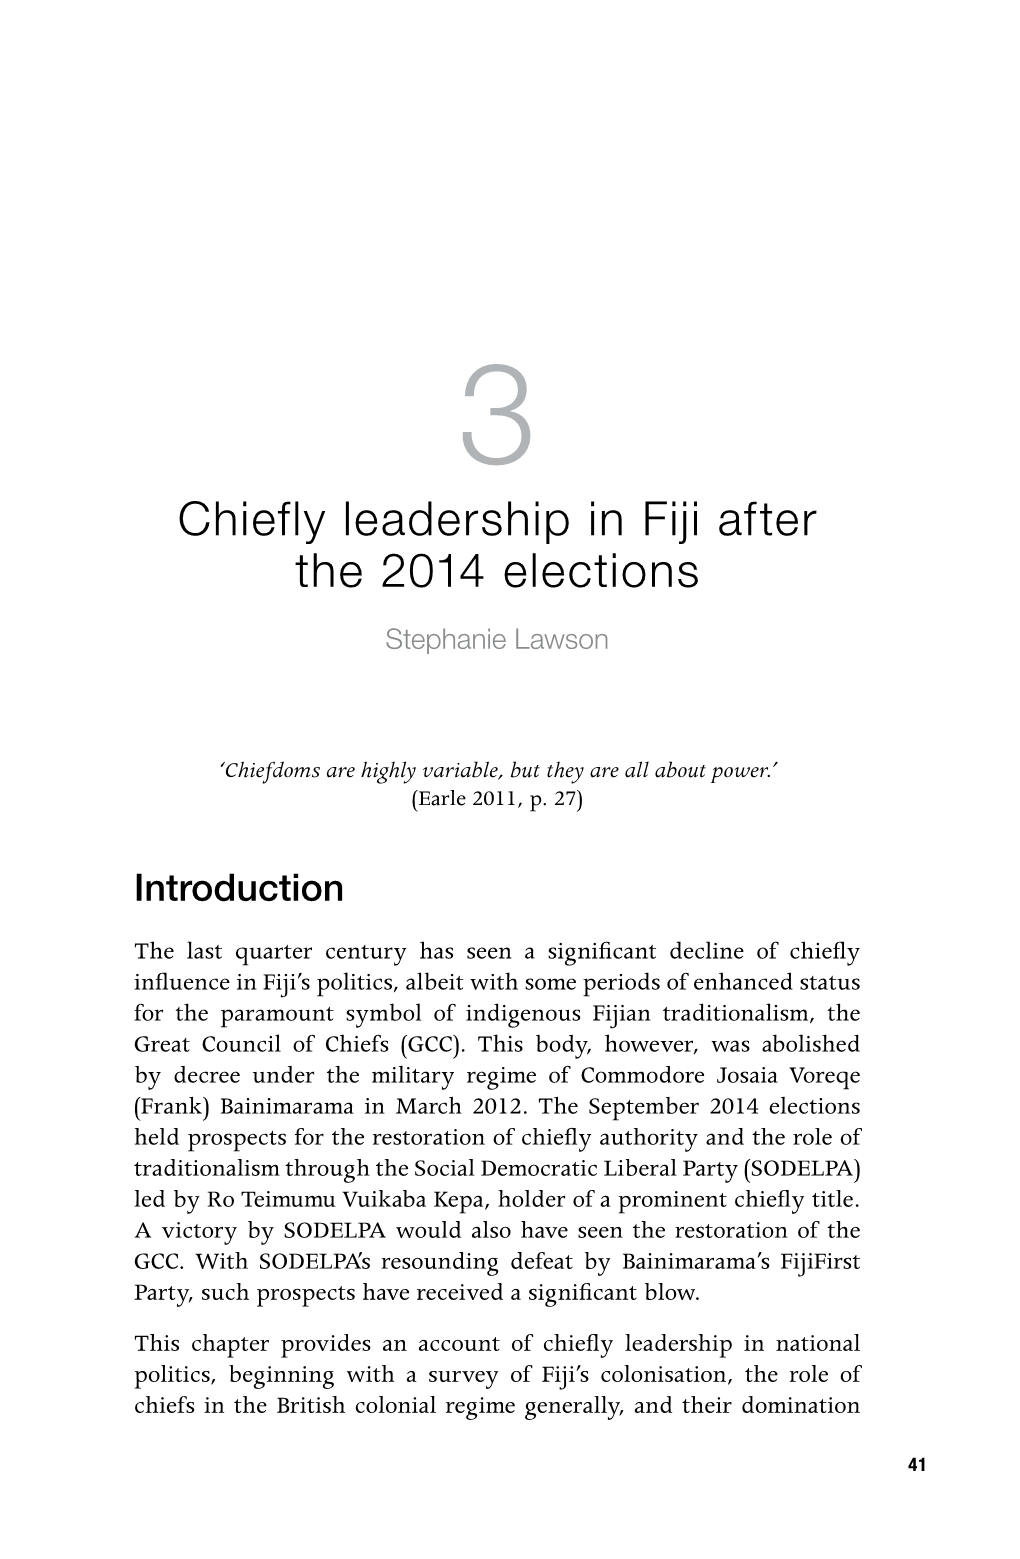 Chiefly Leadership in Fiji After the 2014 Elections Stephanie Lawson